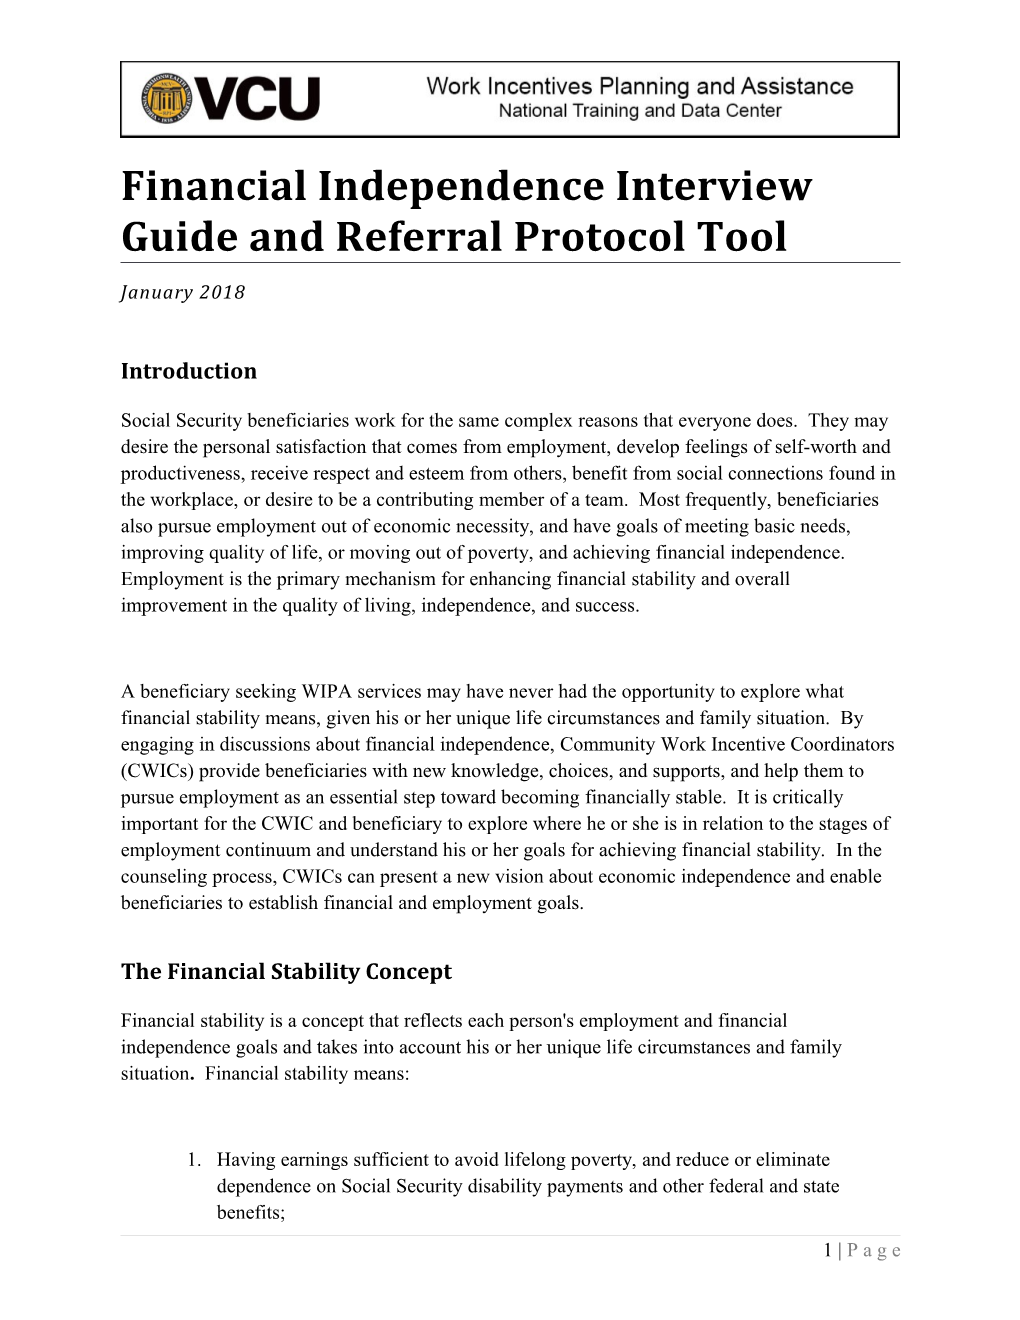 Financial Independence Interview Guide